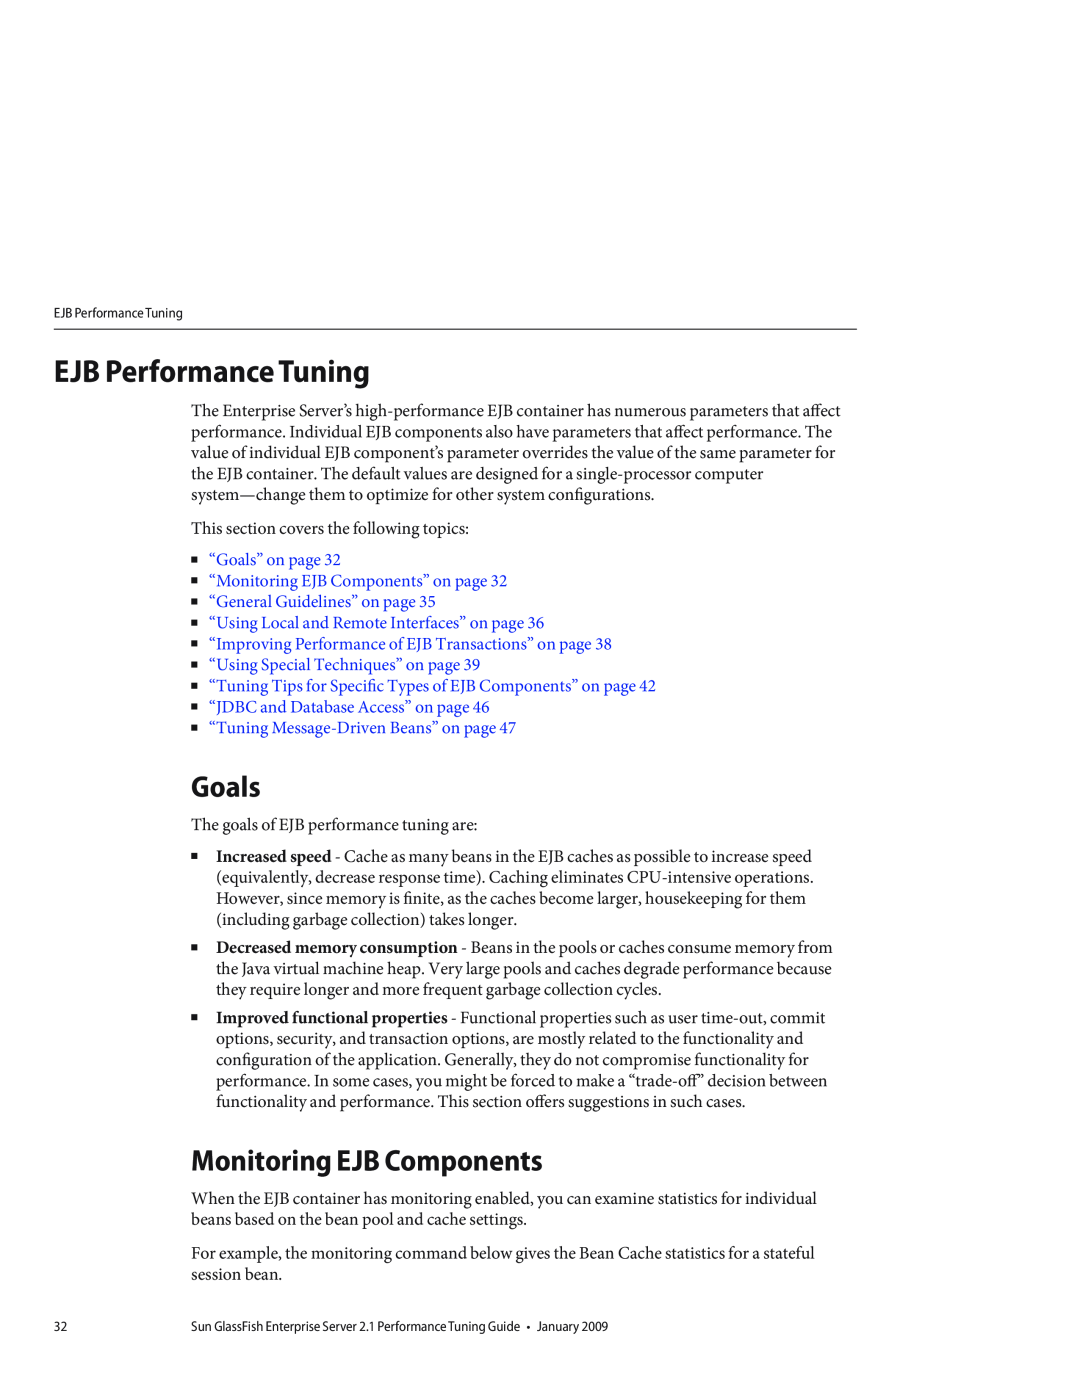 Sun Microsystems 820434310 manual EJB Performance Tuning, Goals, Monitoring EJB Components, “General Guidelines” on page 